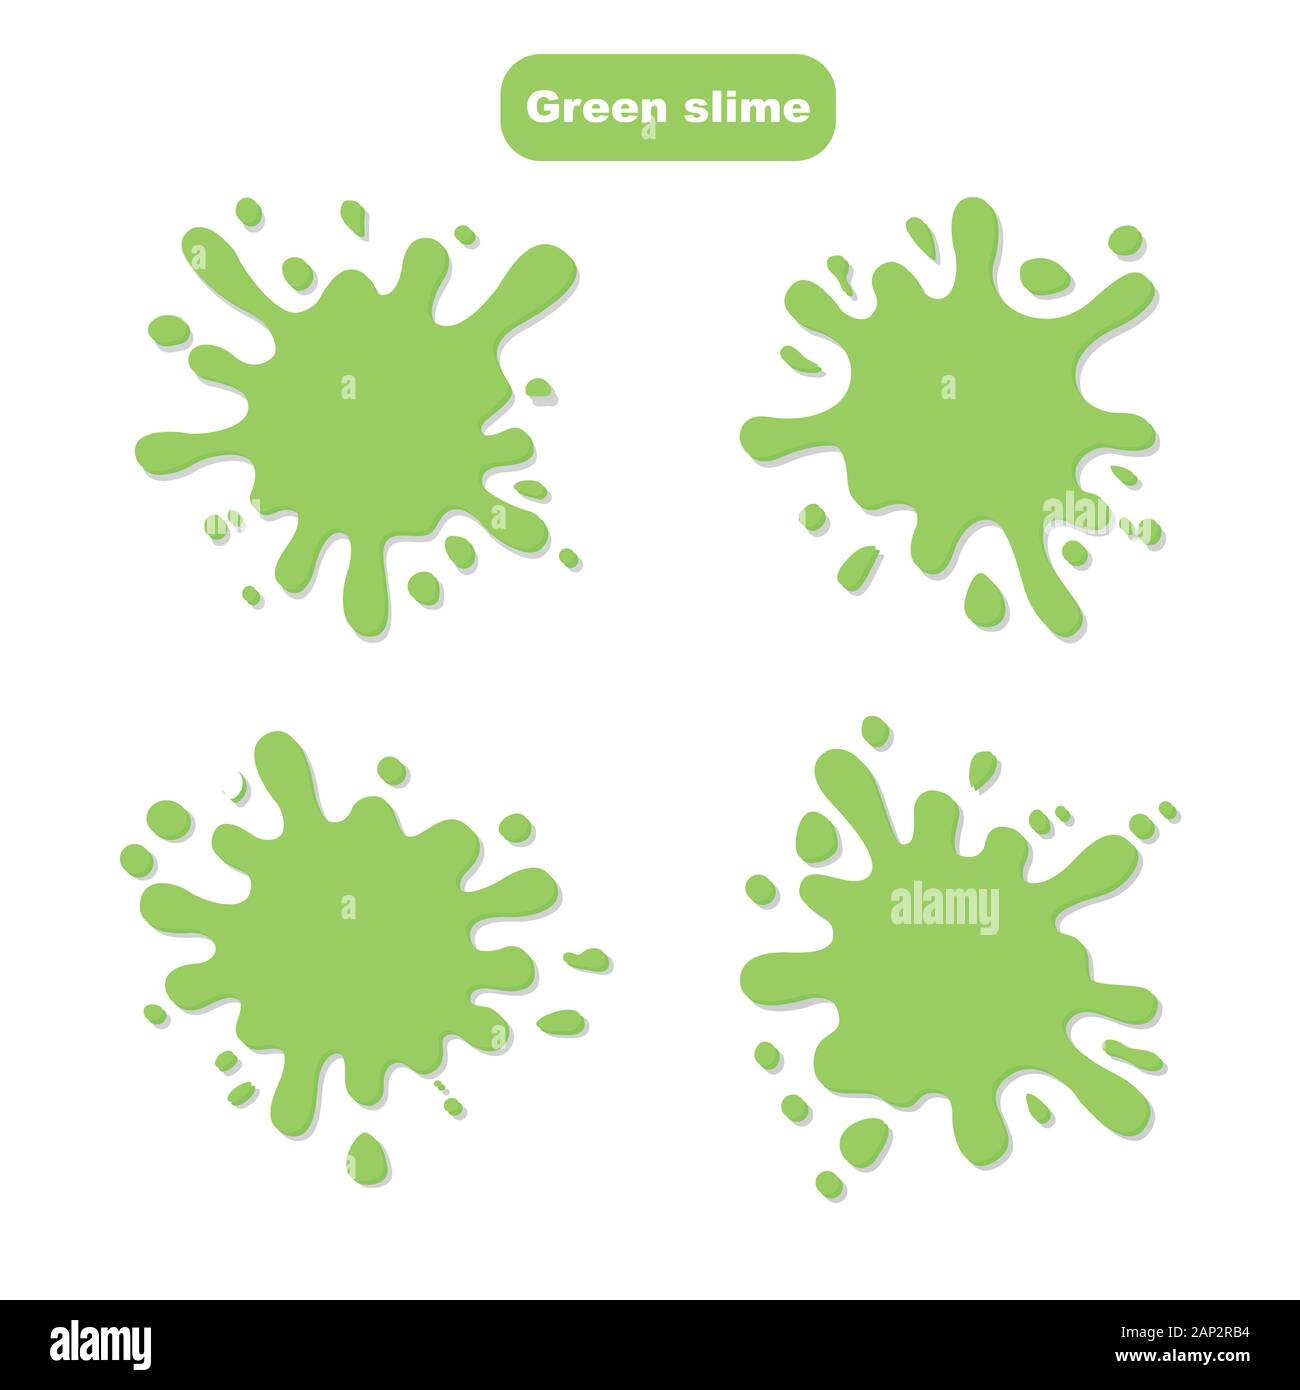 Vector illustration - mucus drips and flows. Abstract green liquid for splash. Stock Vector